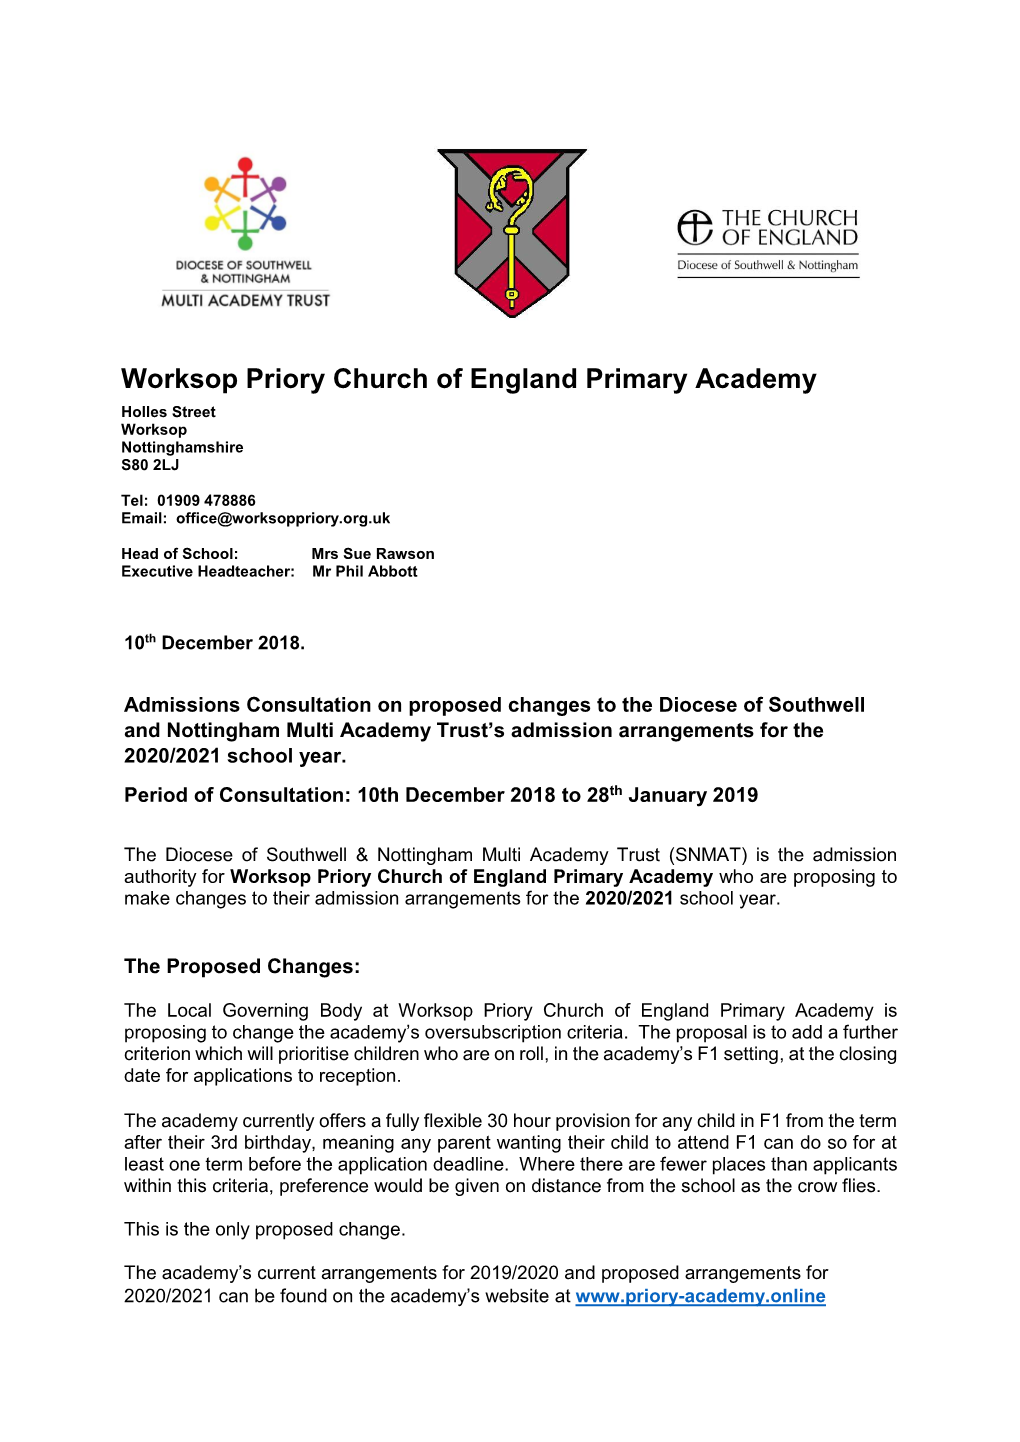 Worksop Priory Church of England Primary Academy Holles Street Worksop Nottinghamshire S80 2LJ